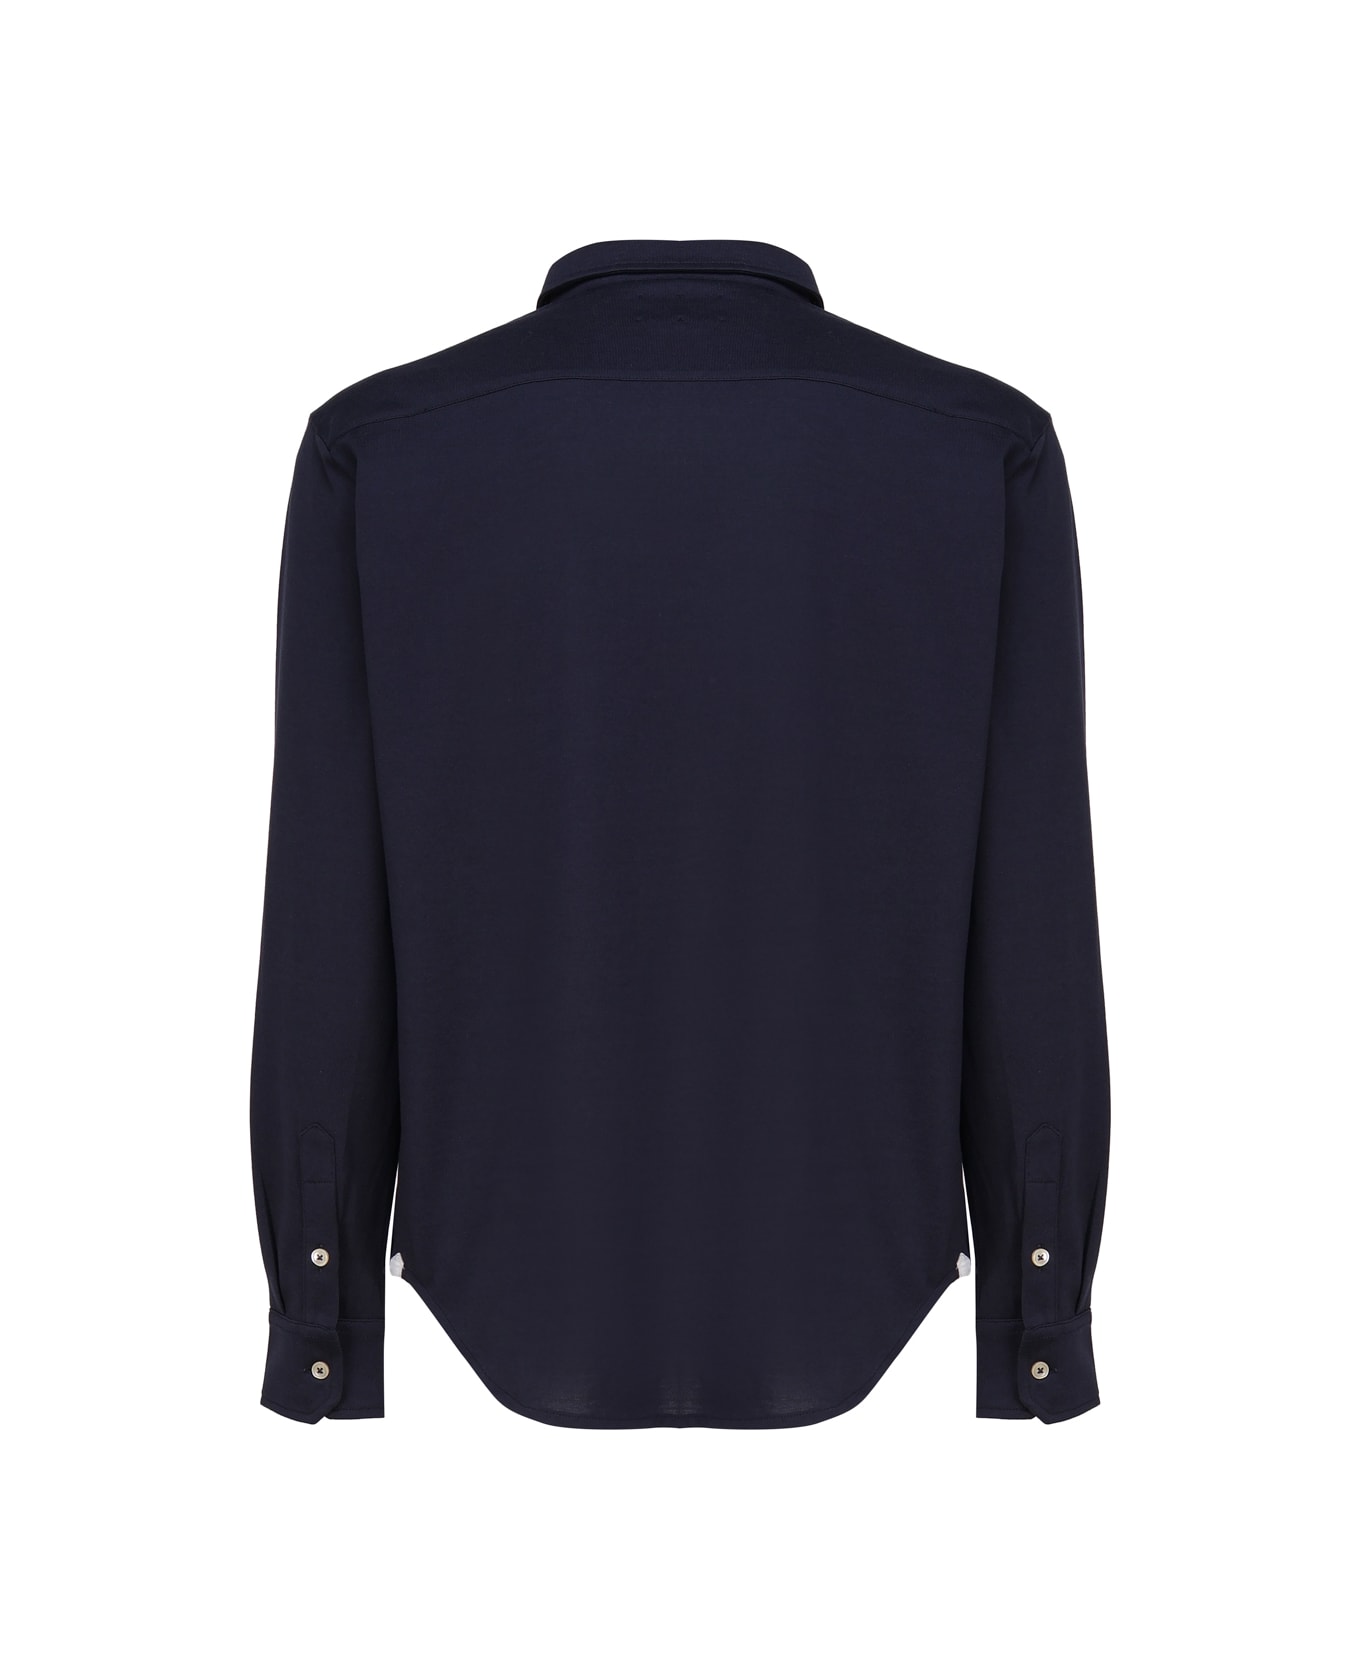 Eleventy Shirt With Contrasting Details - New Blue